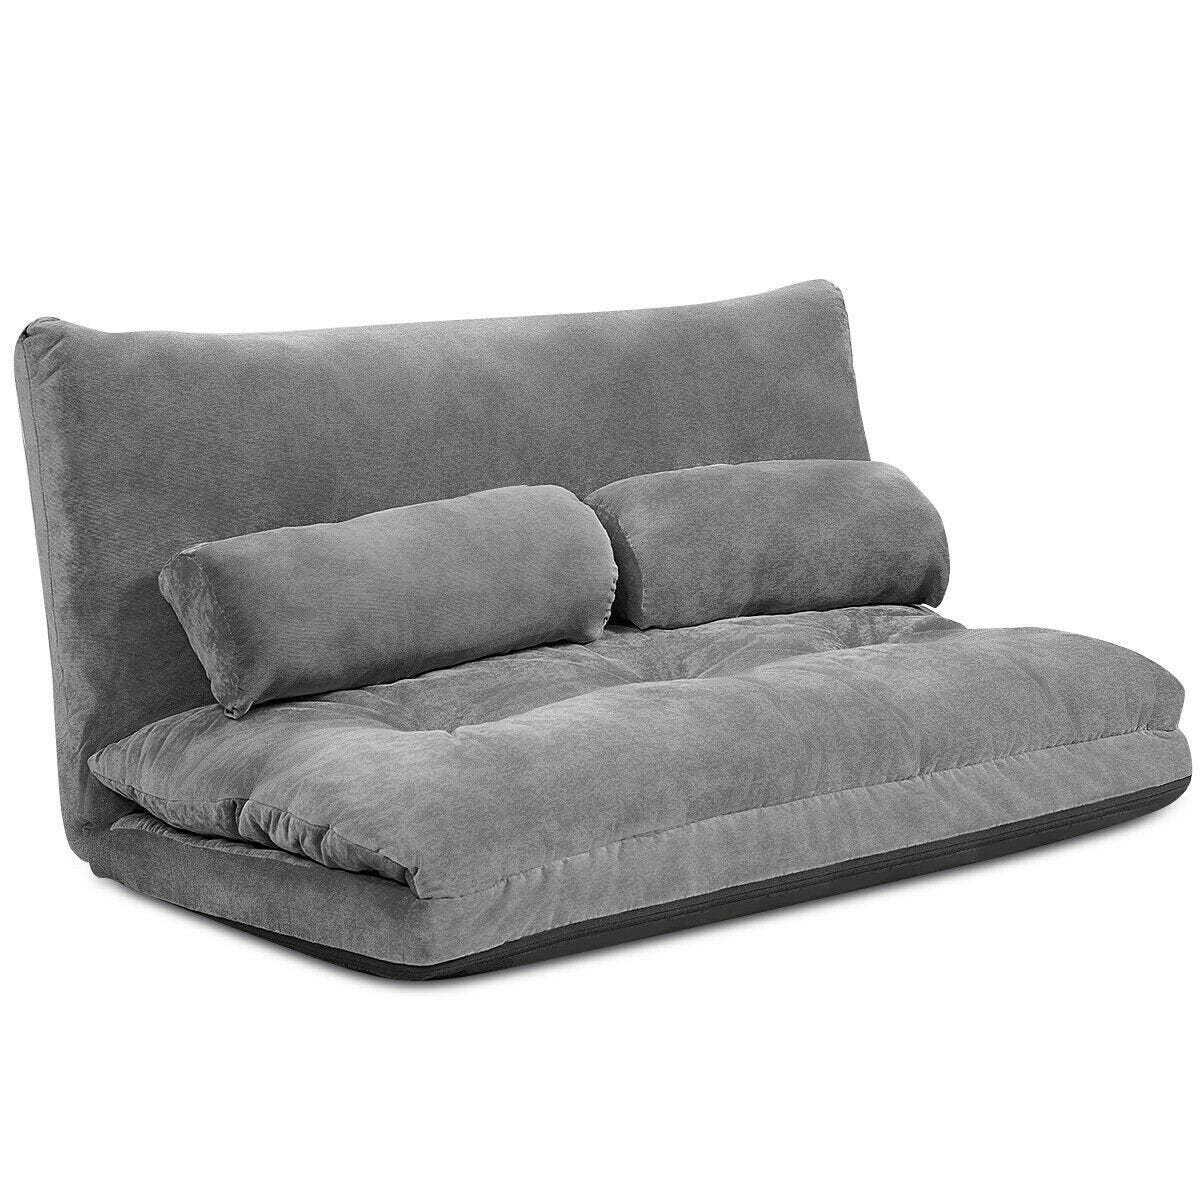 Adjustable Floor Sofa Couch with 2 Pillows, Multi-Functional 6-Position Foldable Lazy Sofa Sleeper Bed